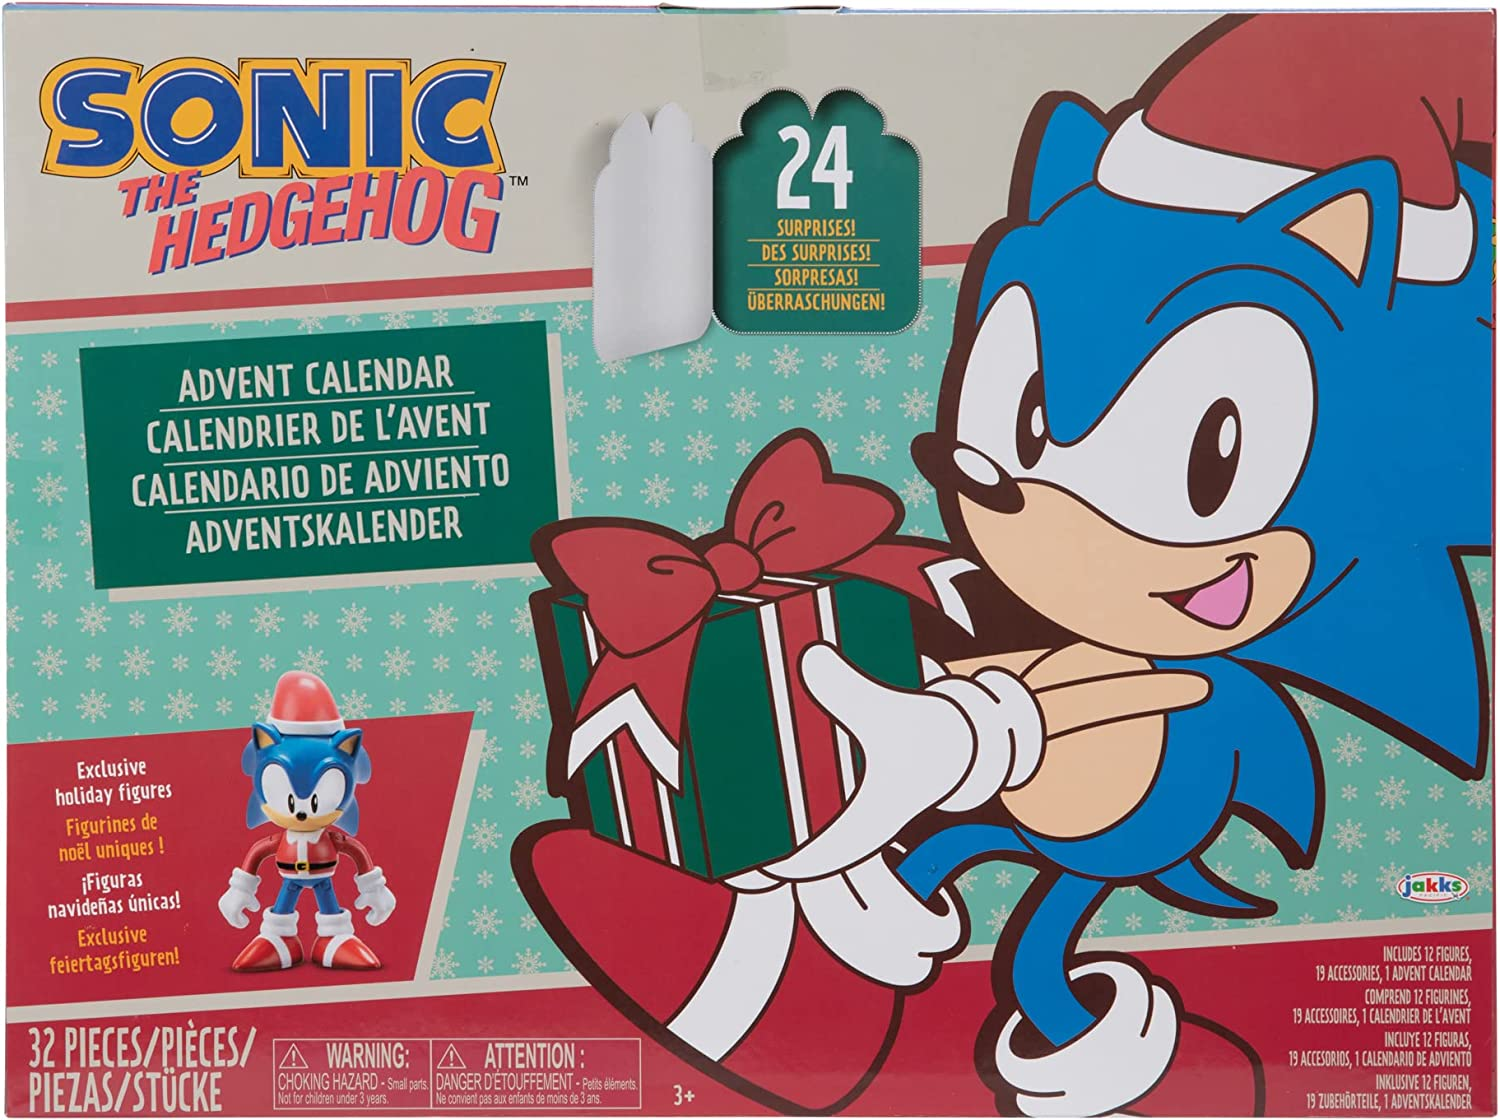 Sonic the Hedgehog Advent Calendar Exclusive Holiday Figures! Hello